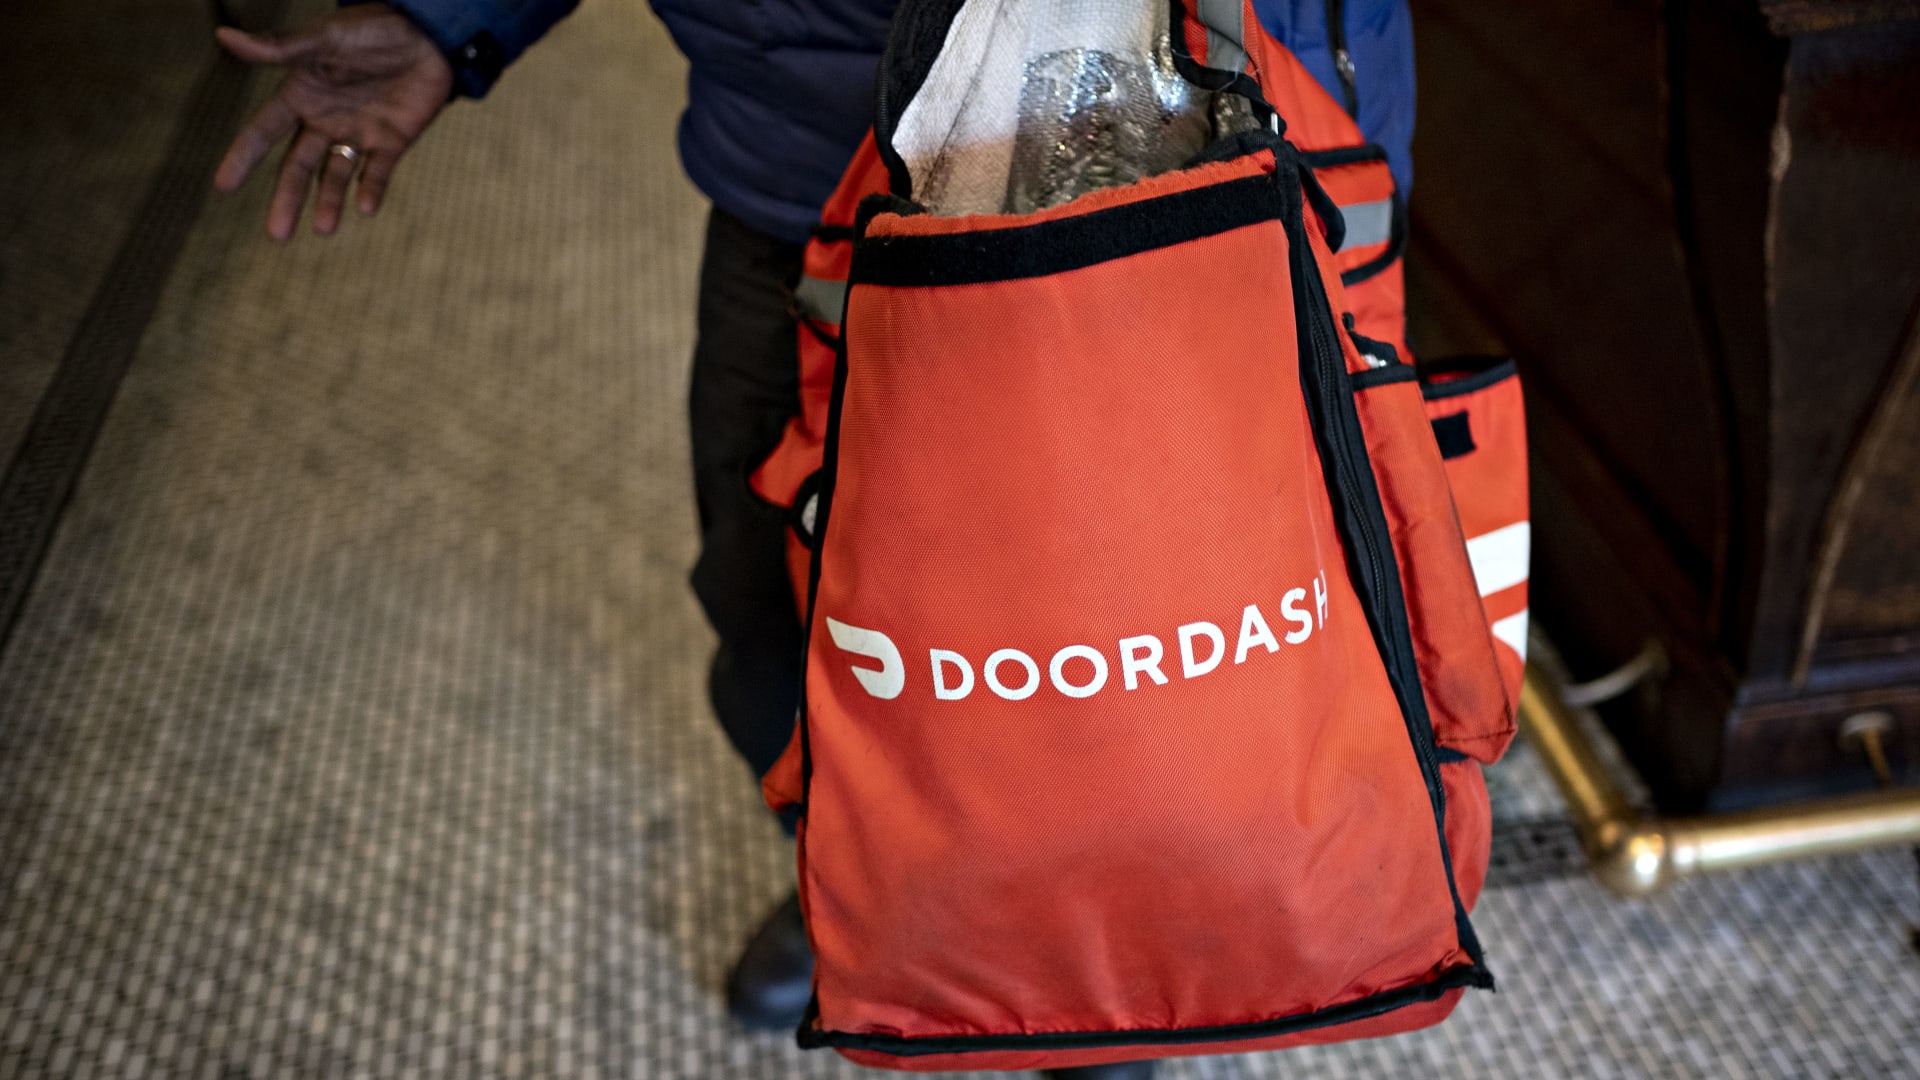 A DoorDash Inc. delivery person holds an insulated bag at a restaurant in Washington, D.C.